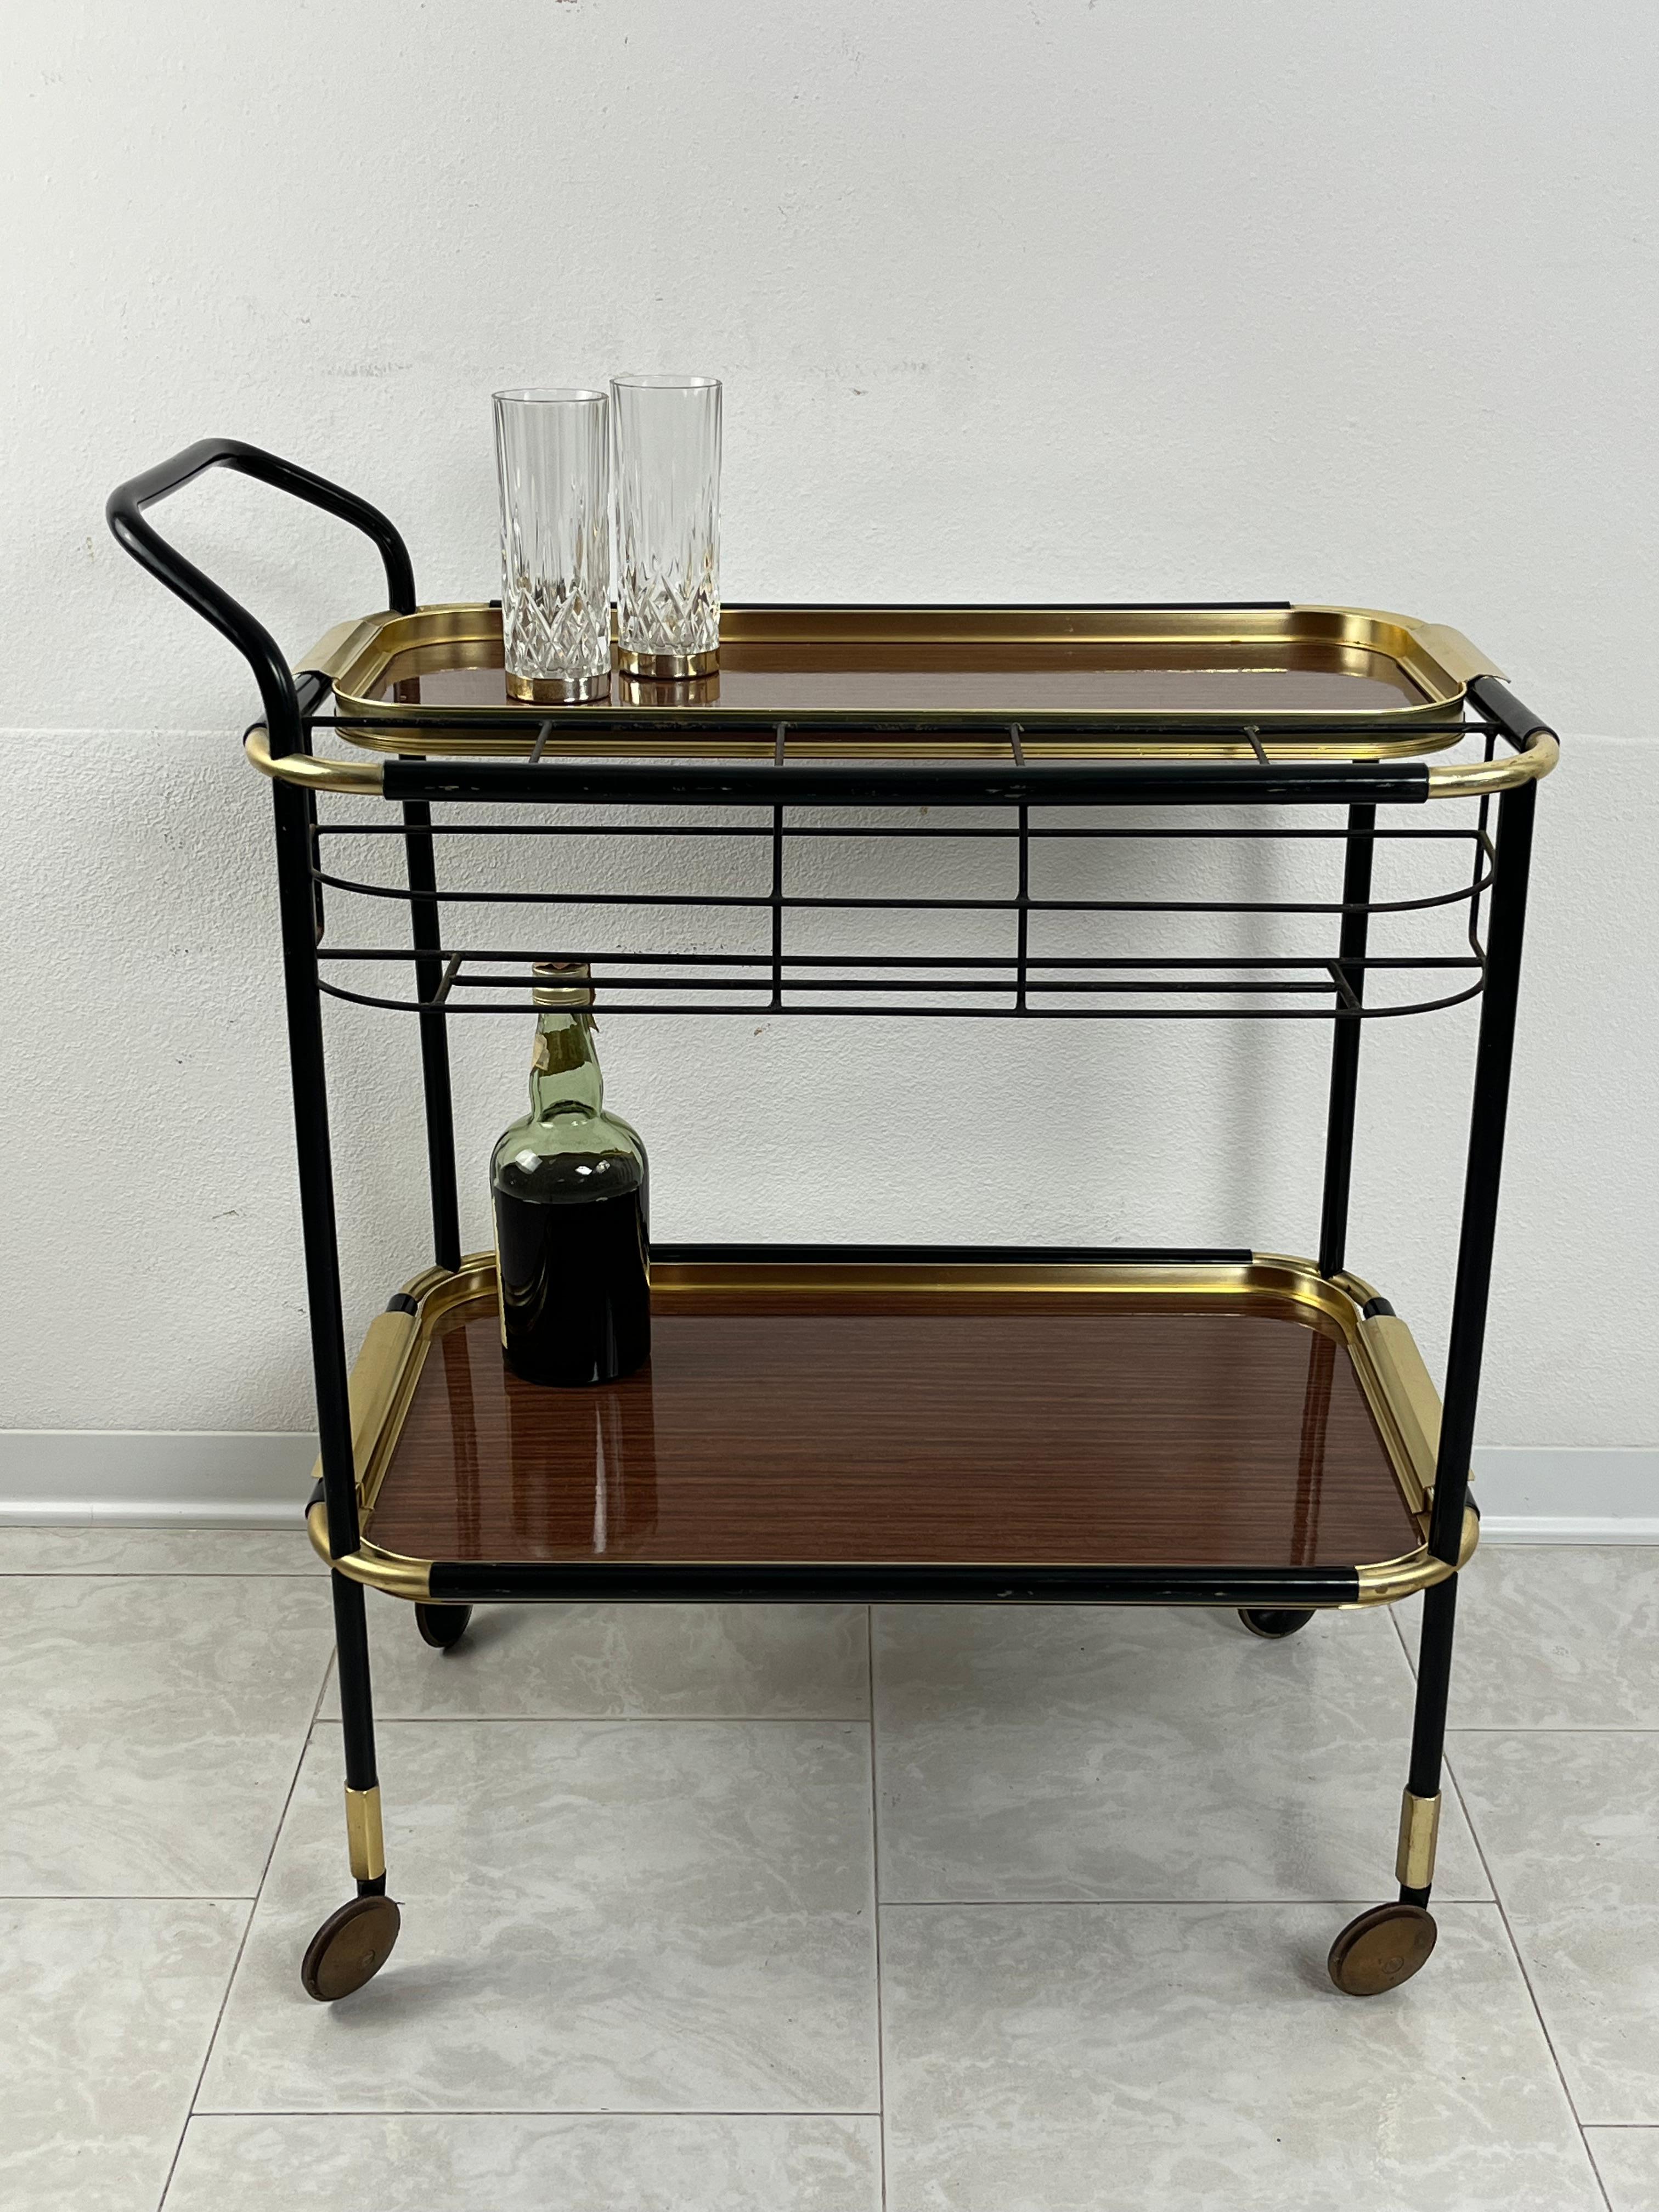 Mid-Century Brass Bar Cart attributed to Ico Parisi Removable Trays 1960s
Intact and in good condition, small signs of aging.
It has 4 swivel wheels. Made in Italy.